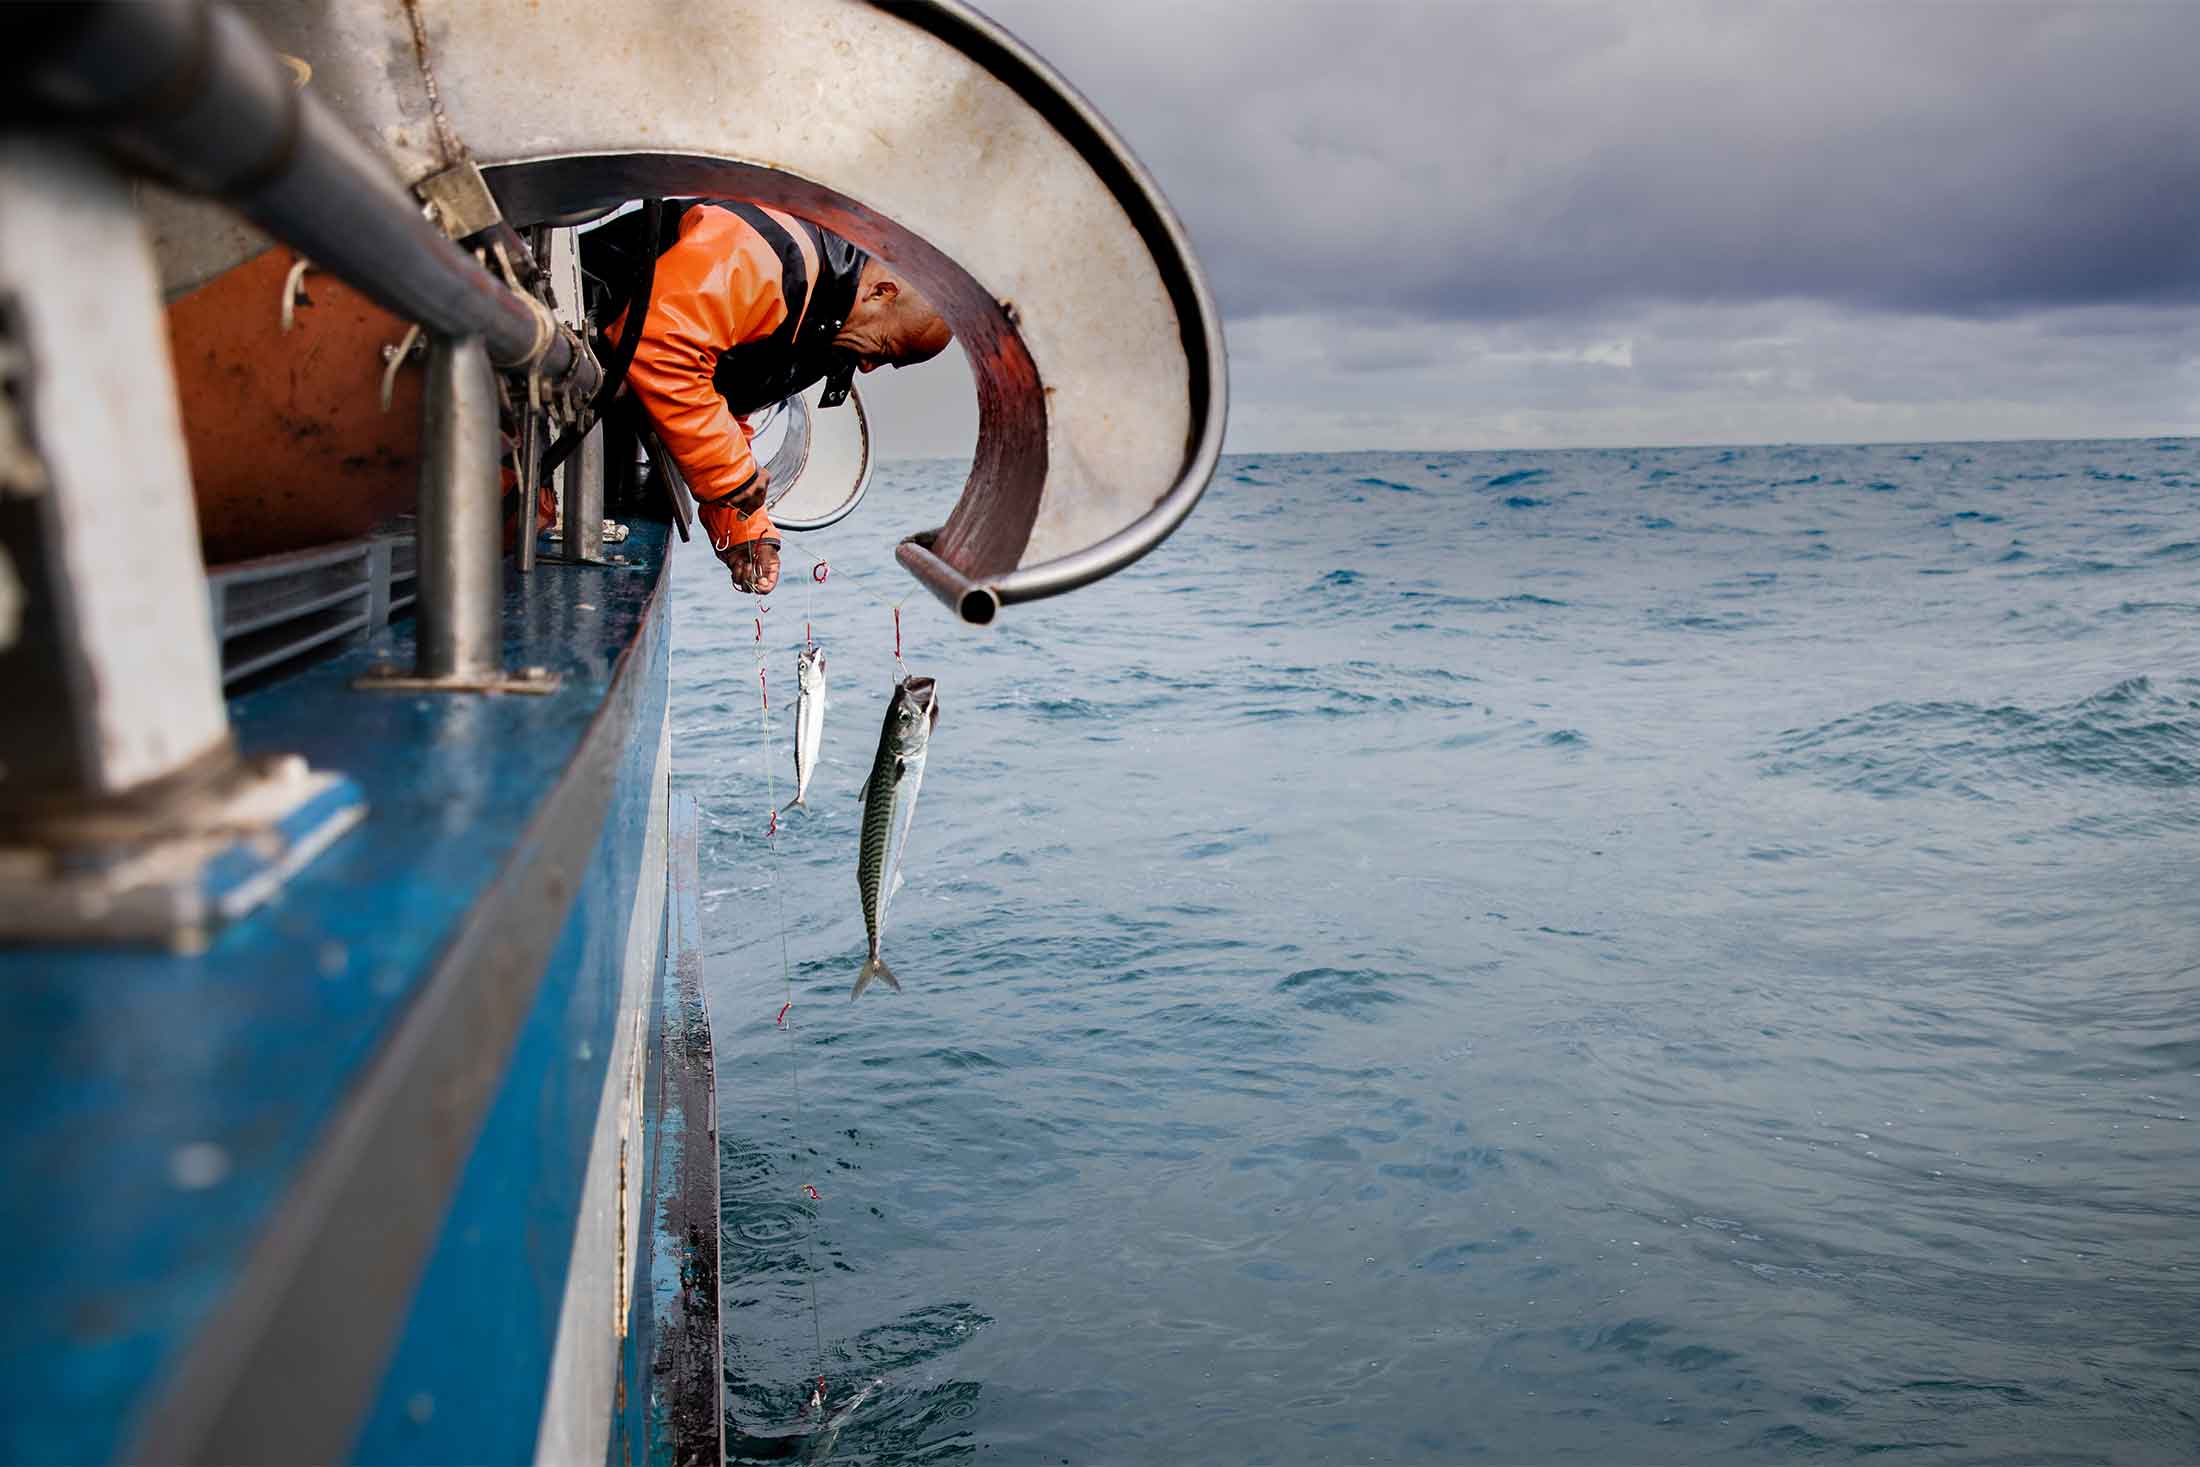 A worker leans over the side of a mackerel fishing boat and checks lines pulling up Atlantic mackerel